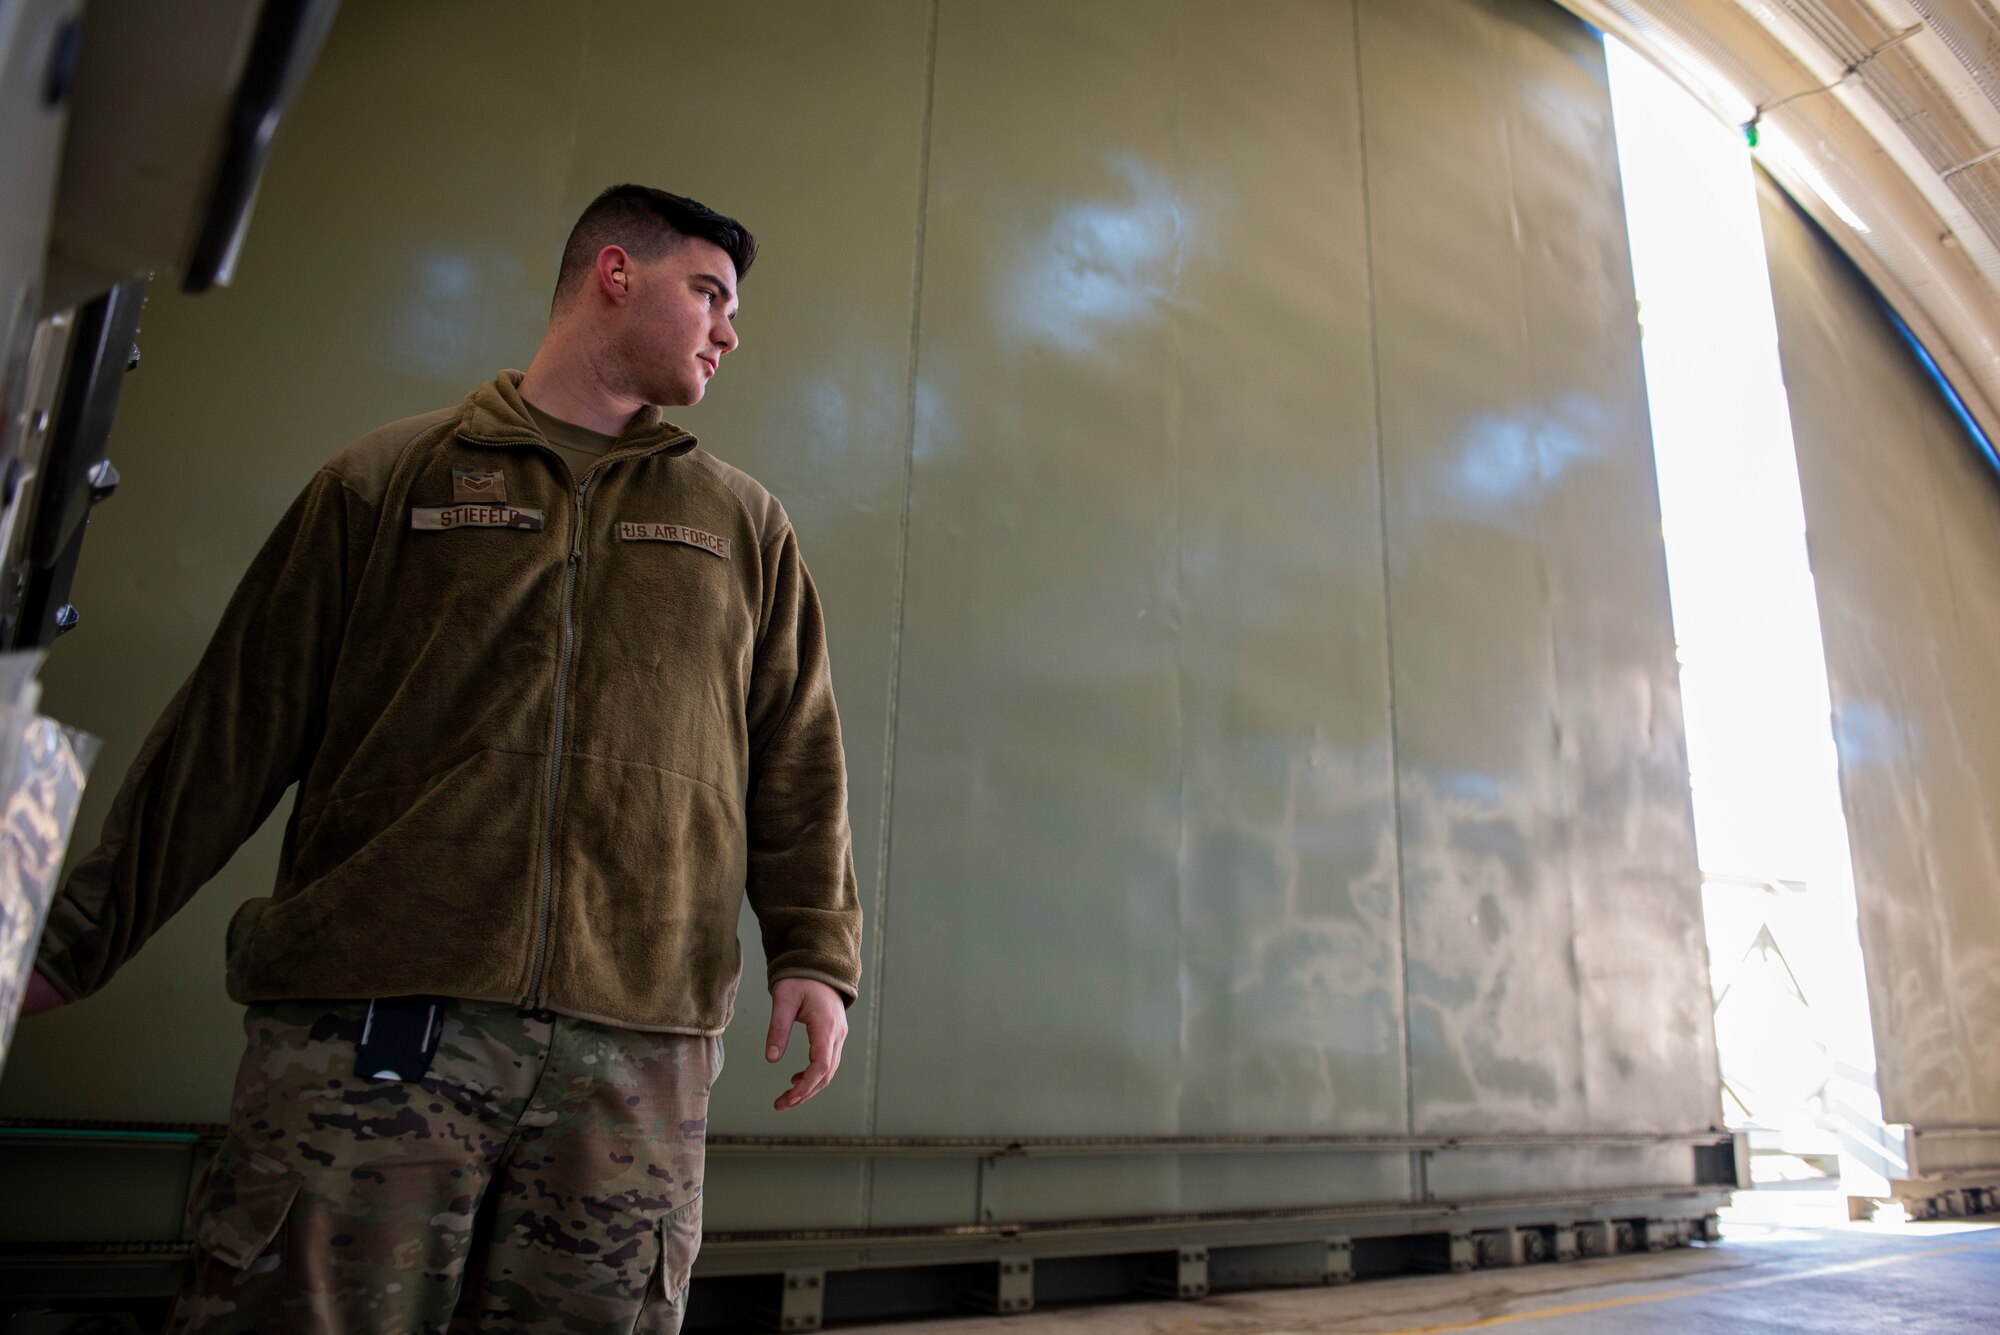 Senior Airman Austin Stiefeld, a special weapons technician assigned to the 39th Maintenance Squadron, opens a hangar at Incirlik Air Base, Turkey, Dec. 21, 2021.